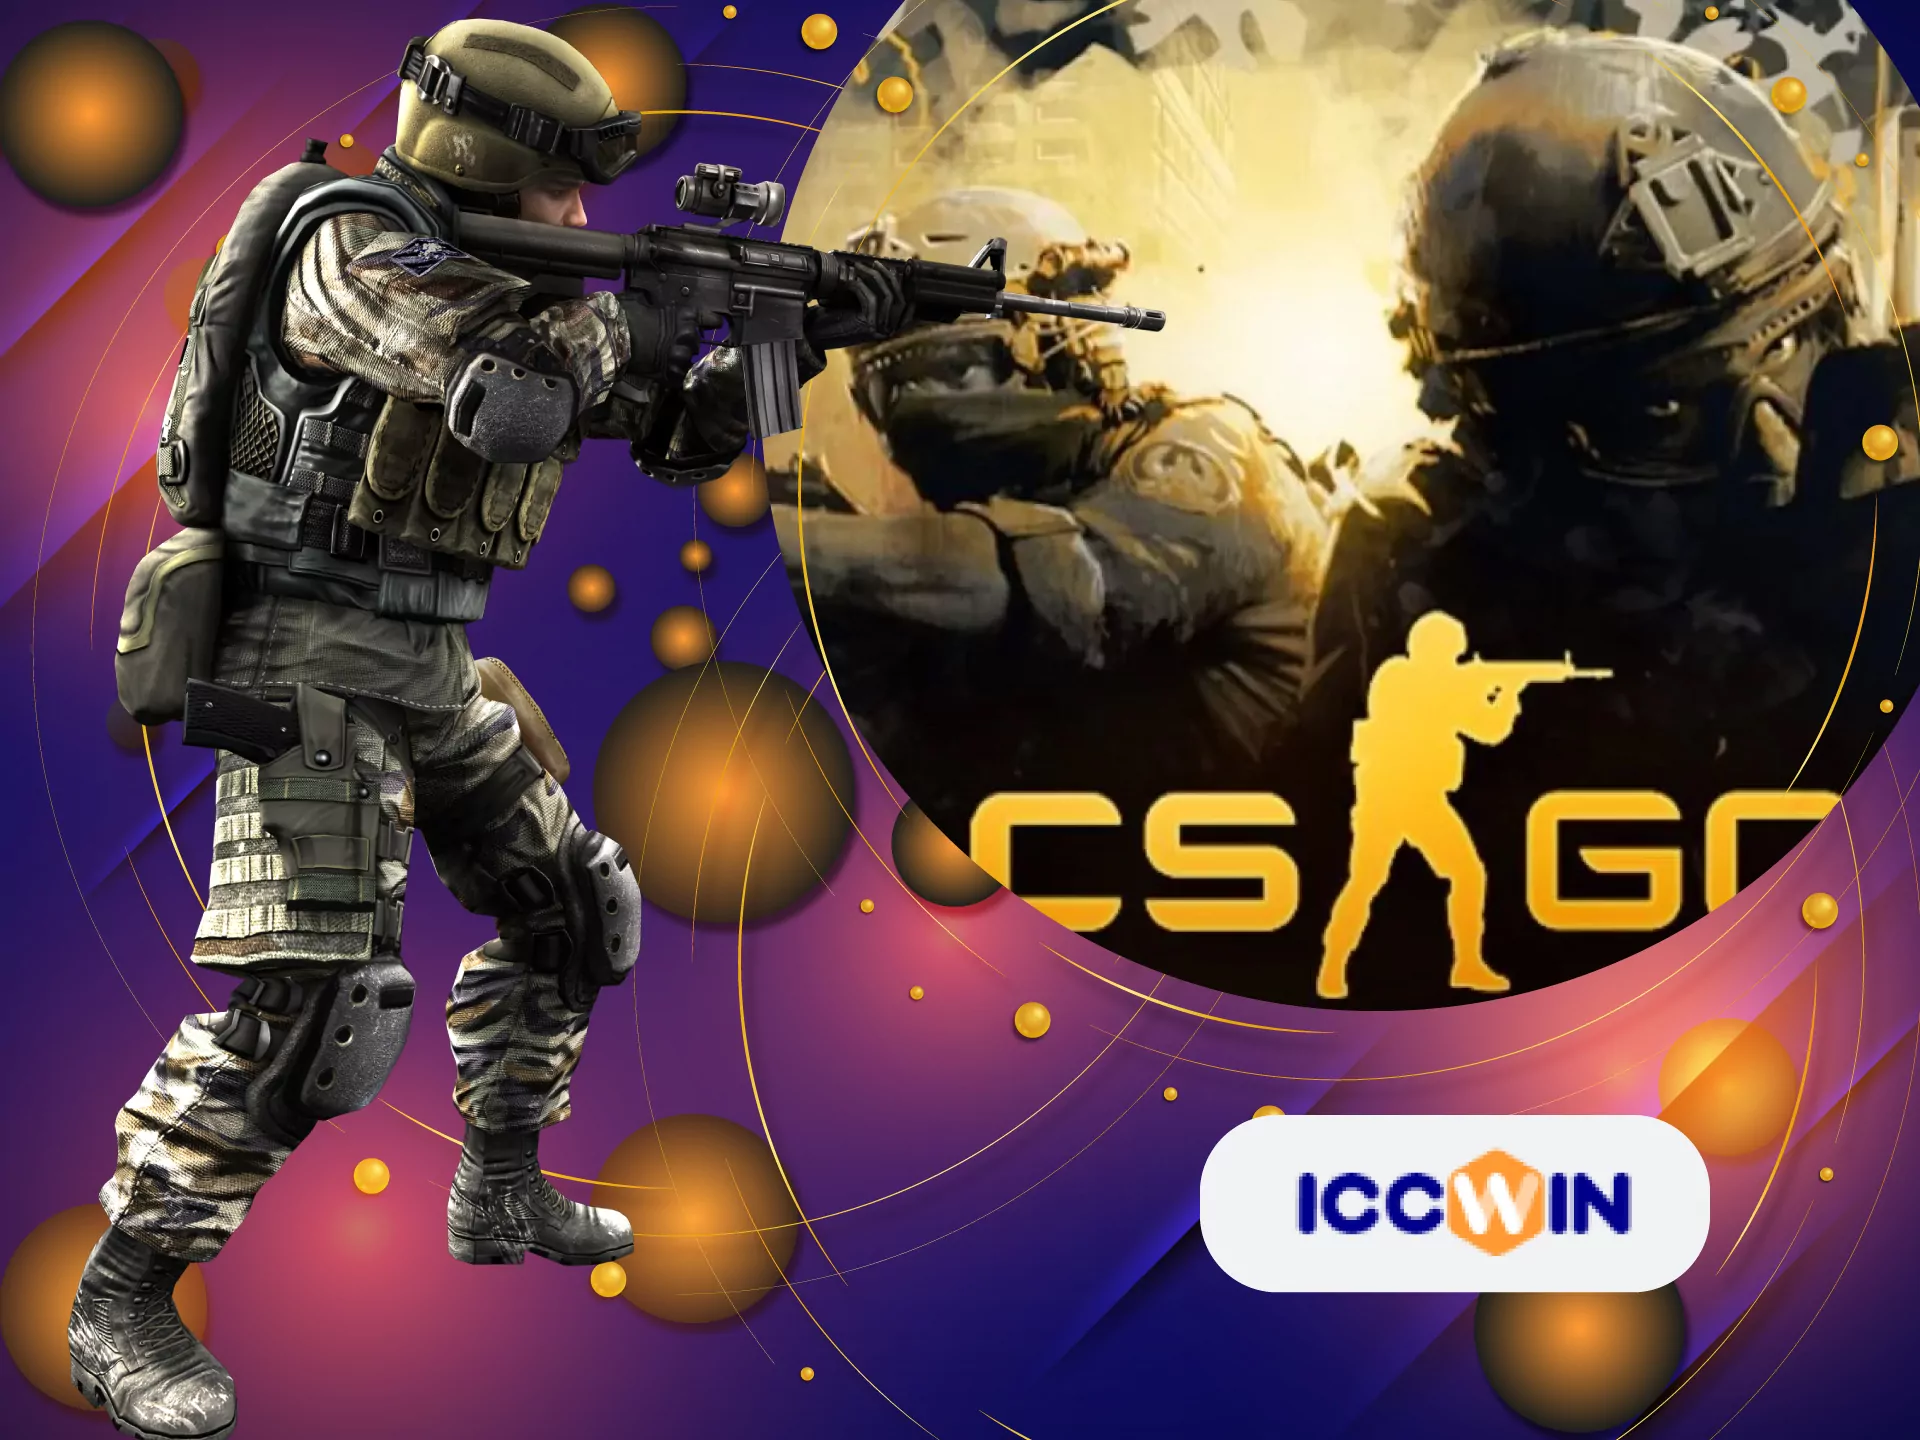 CS:GO is also there to bet on at ICCWIN.